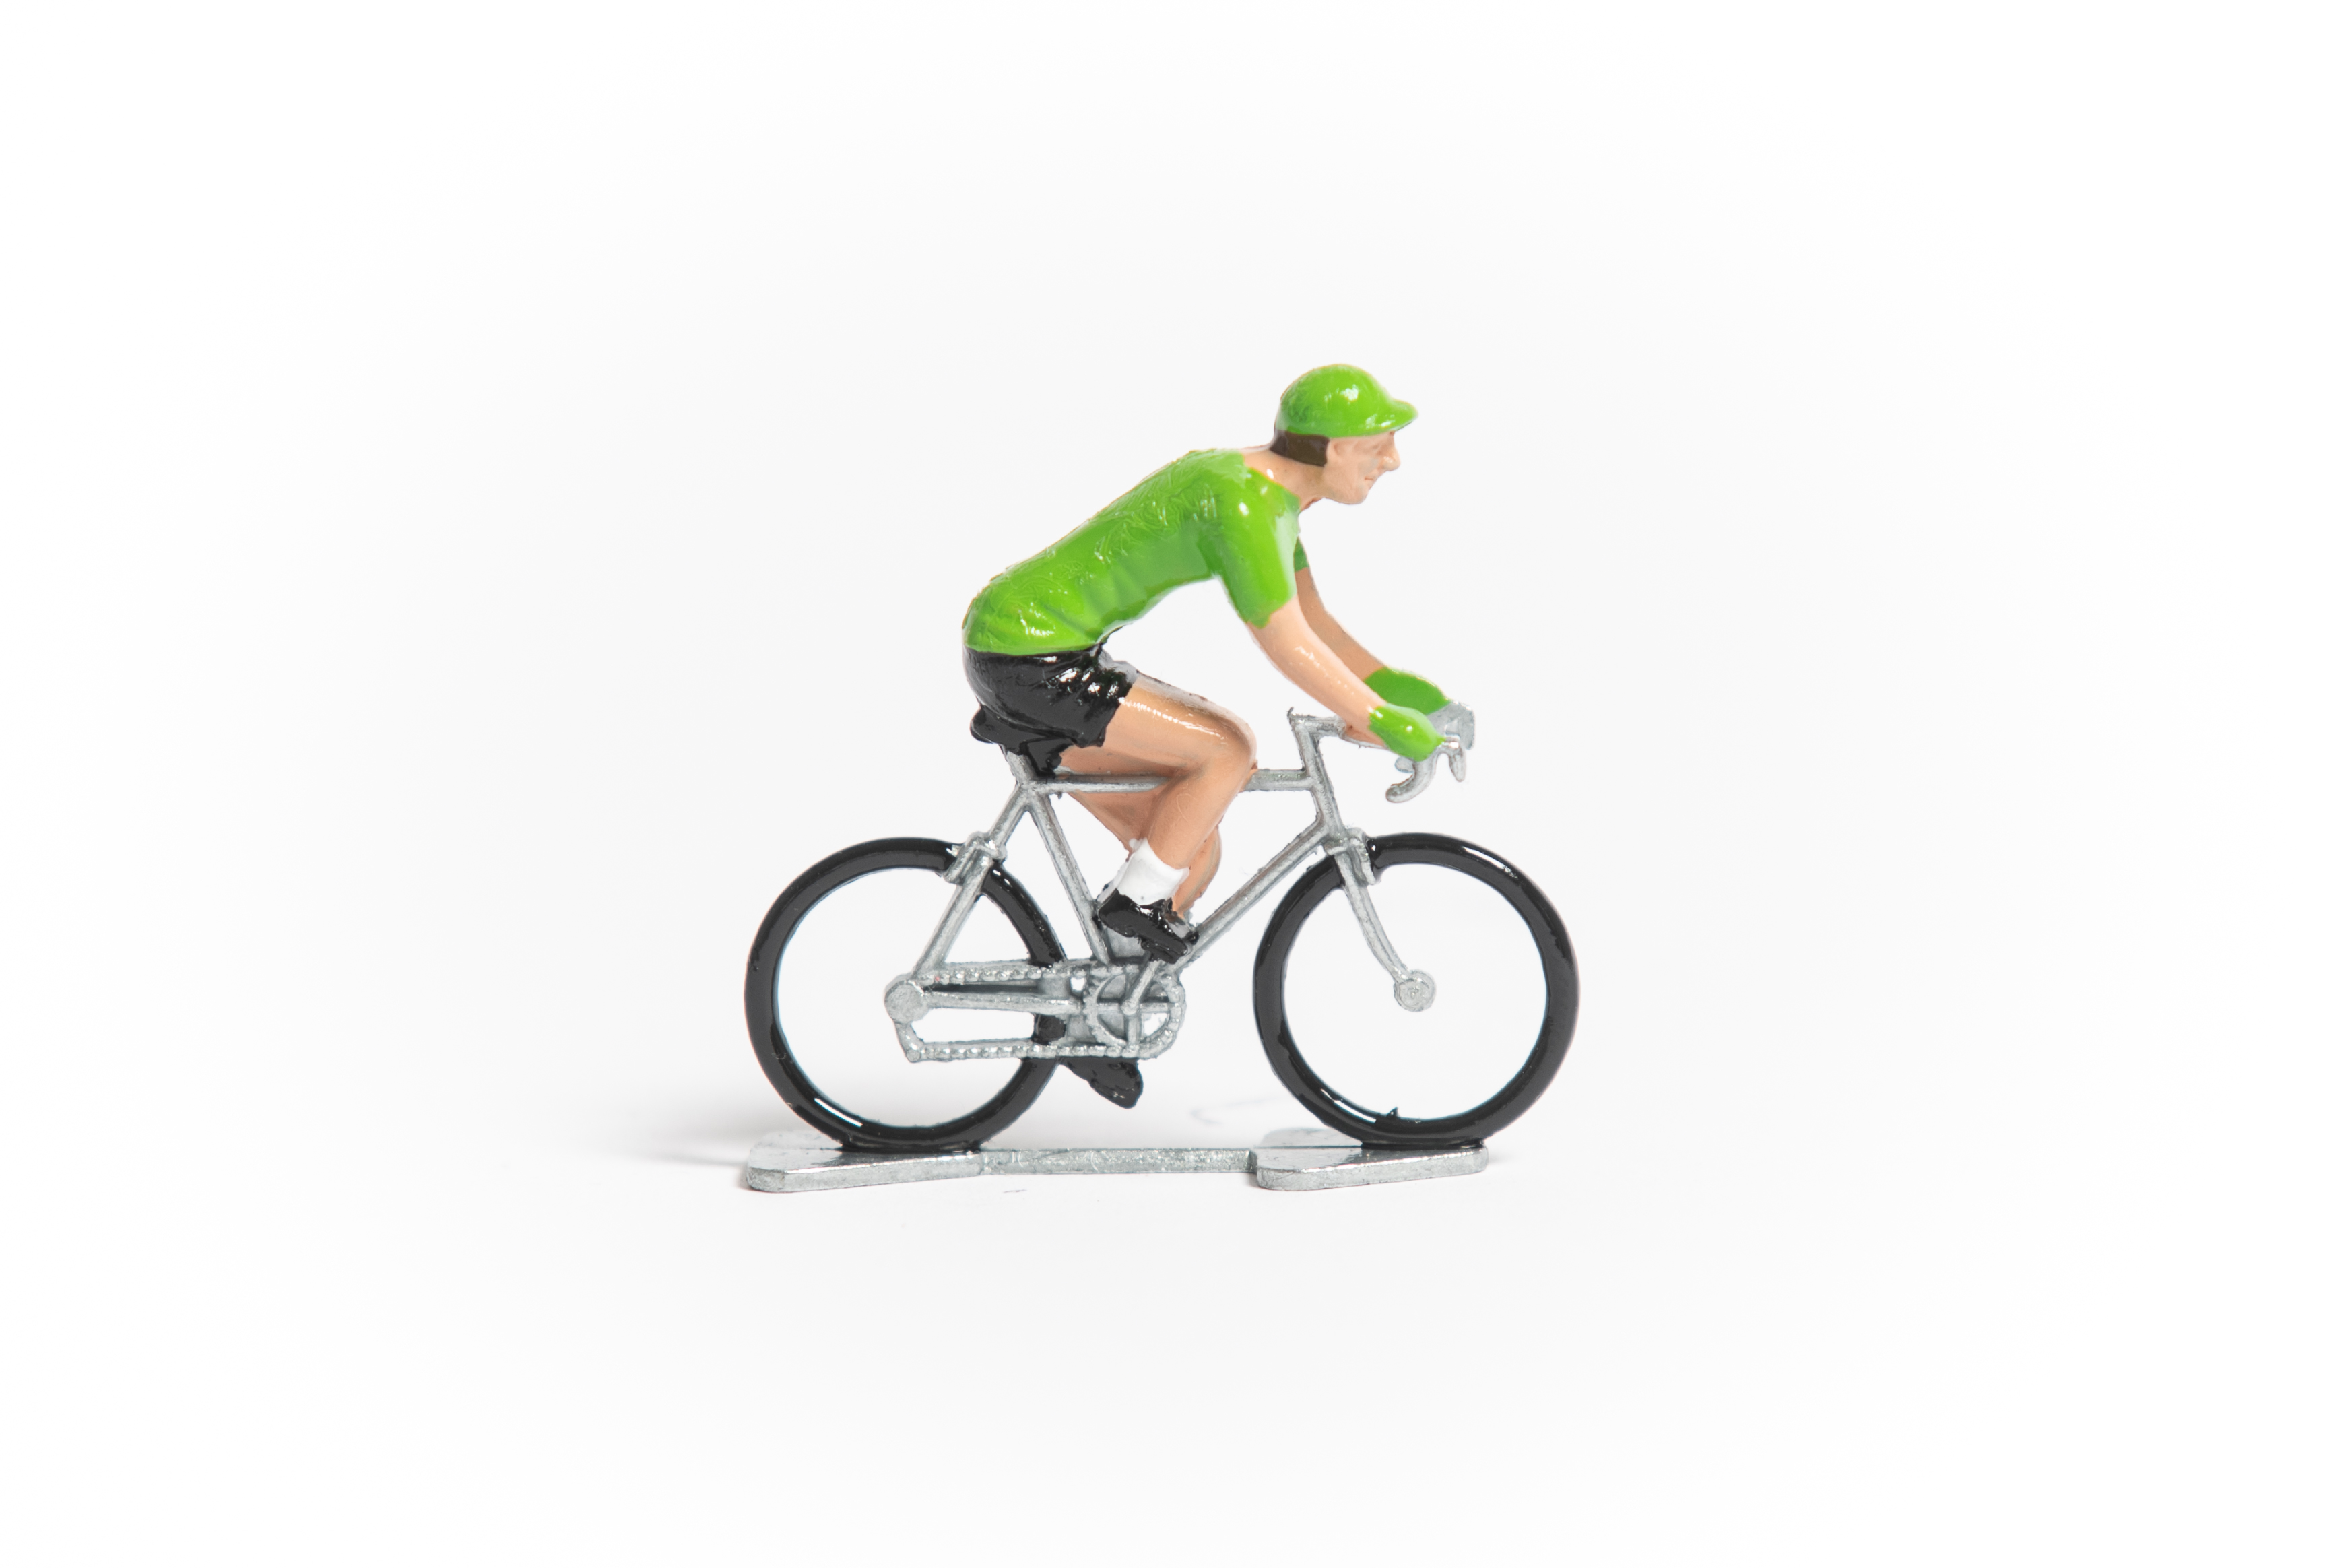 Cavendish Green Jersey 2021 Hand crafted cycling figure